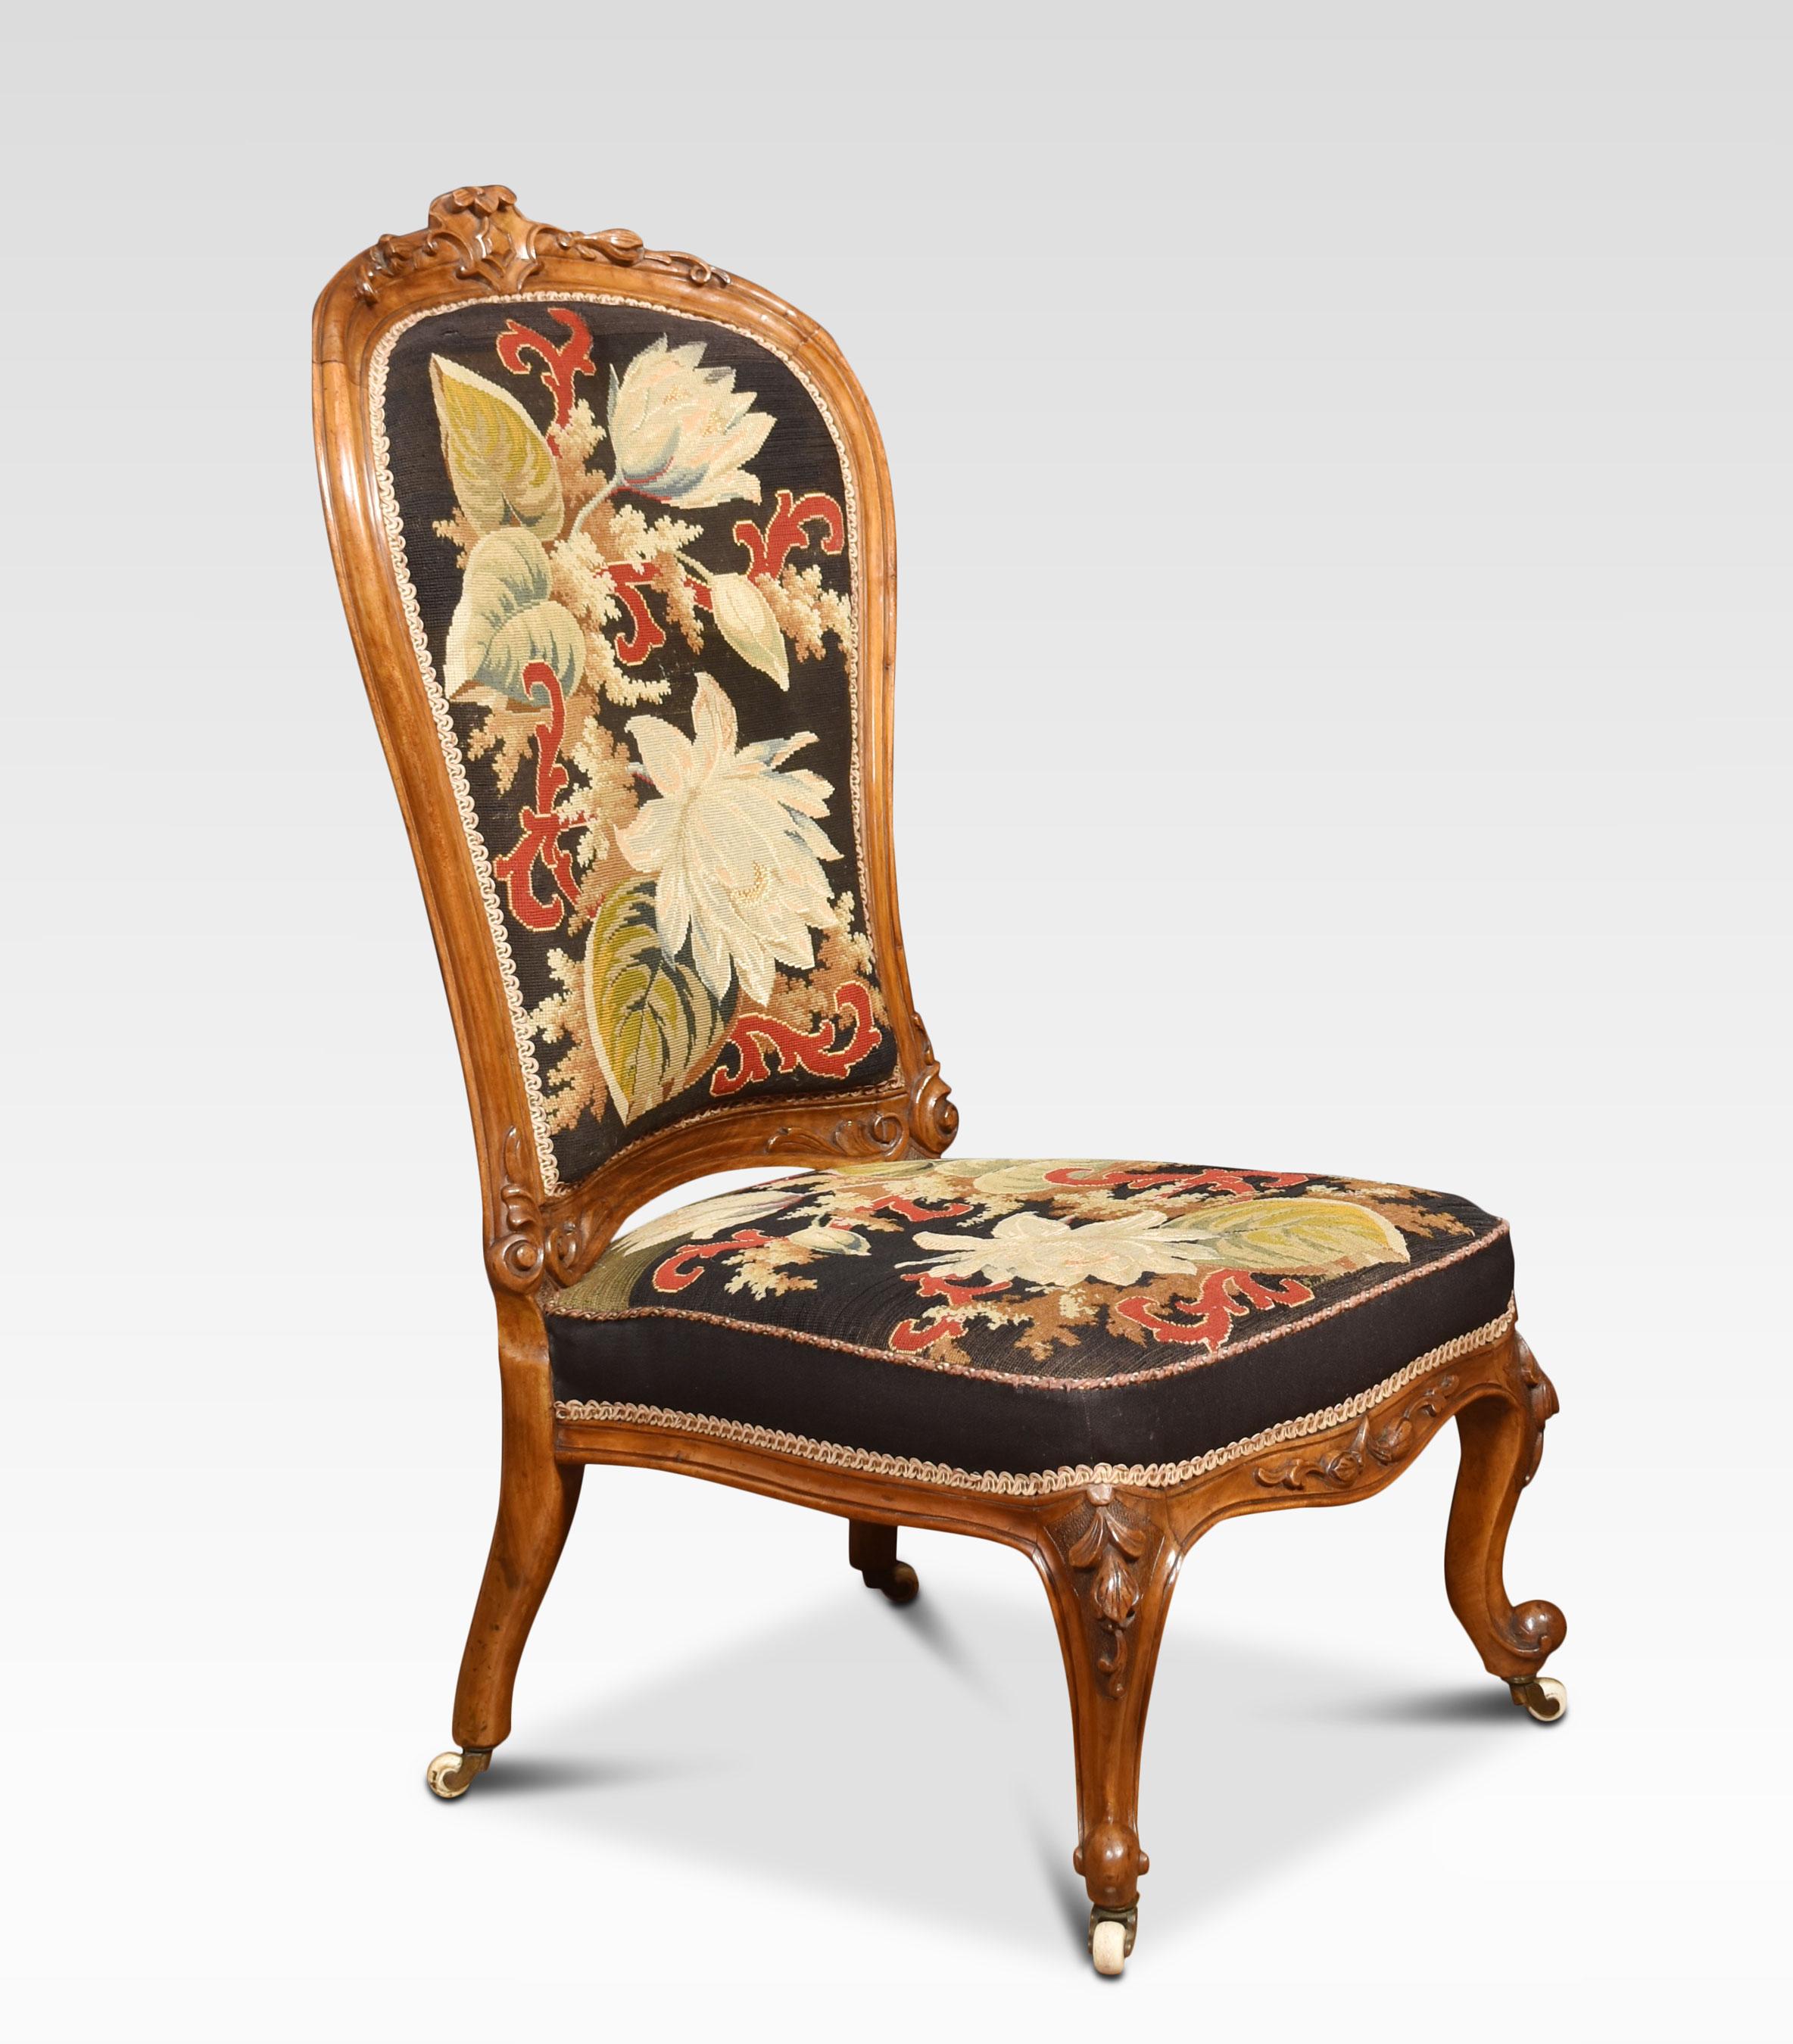 Walnut nursing chair the foliate carved frame with needlepoint upholstered back and seat. All raised up on foliate carved squat cabriole legs and ceramic castors.
Dimensions
Height 41.5 inches height to seat 14 Inches
Width 21.5 inches
Depth 27